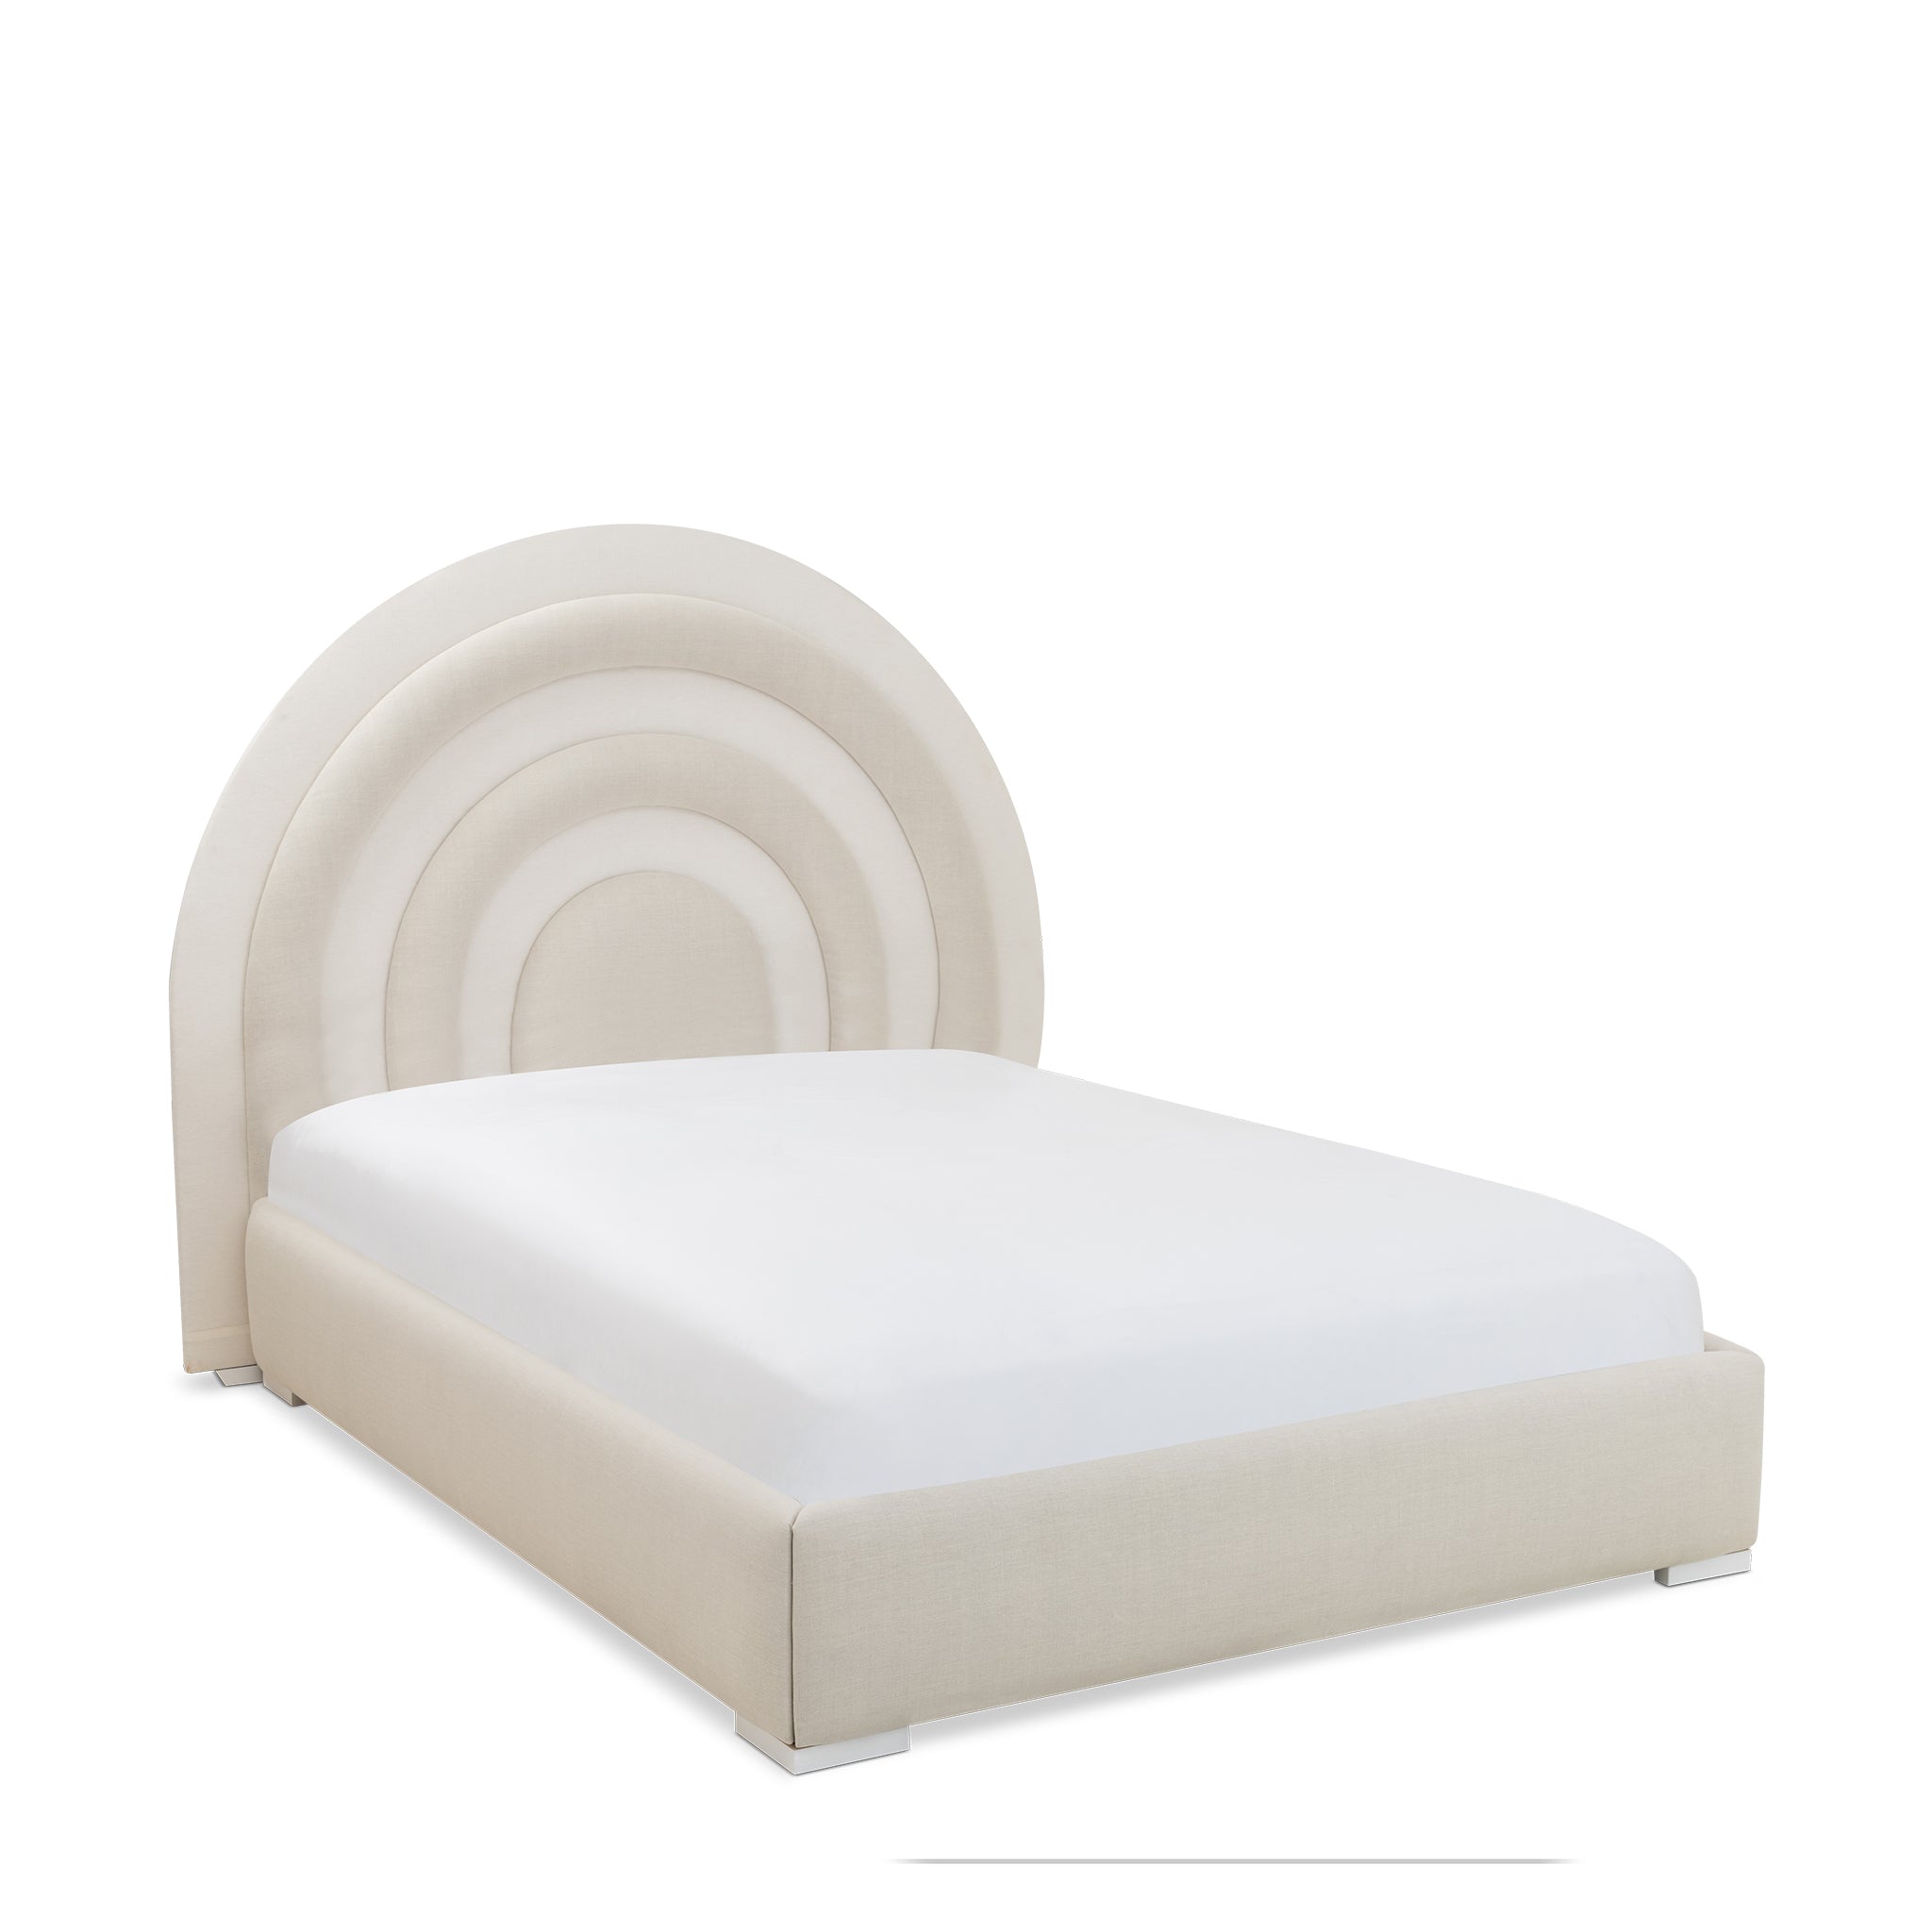 ARCH BED US QUEEN SIZE